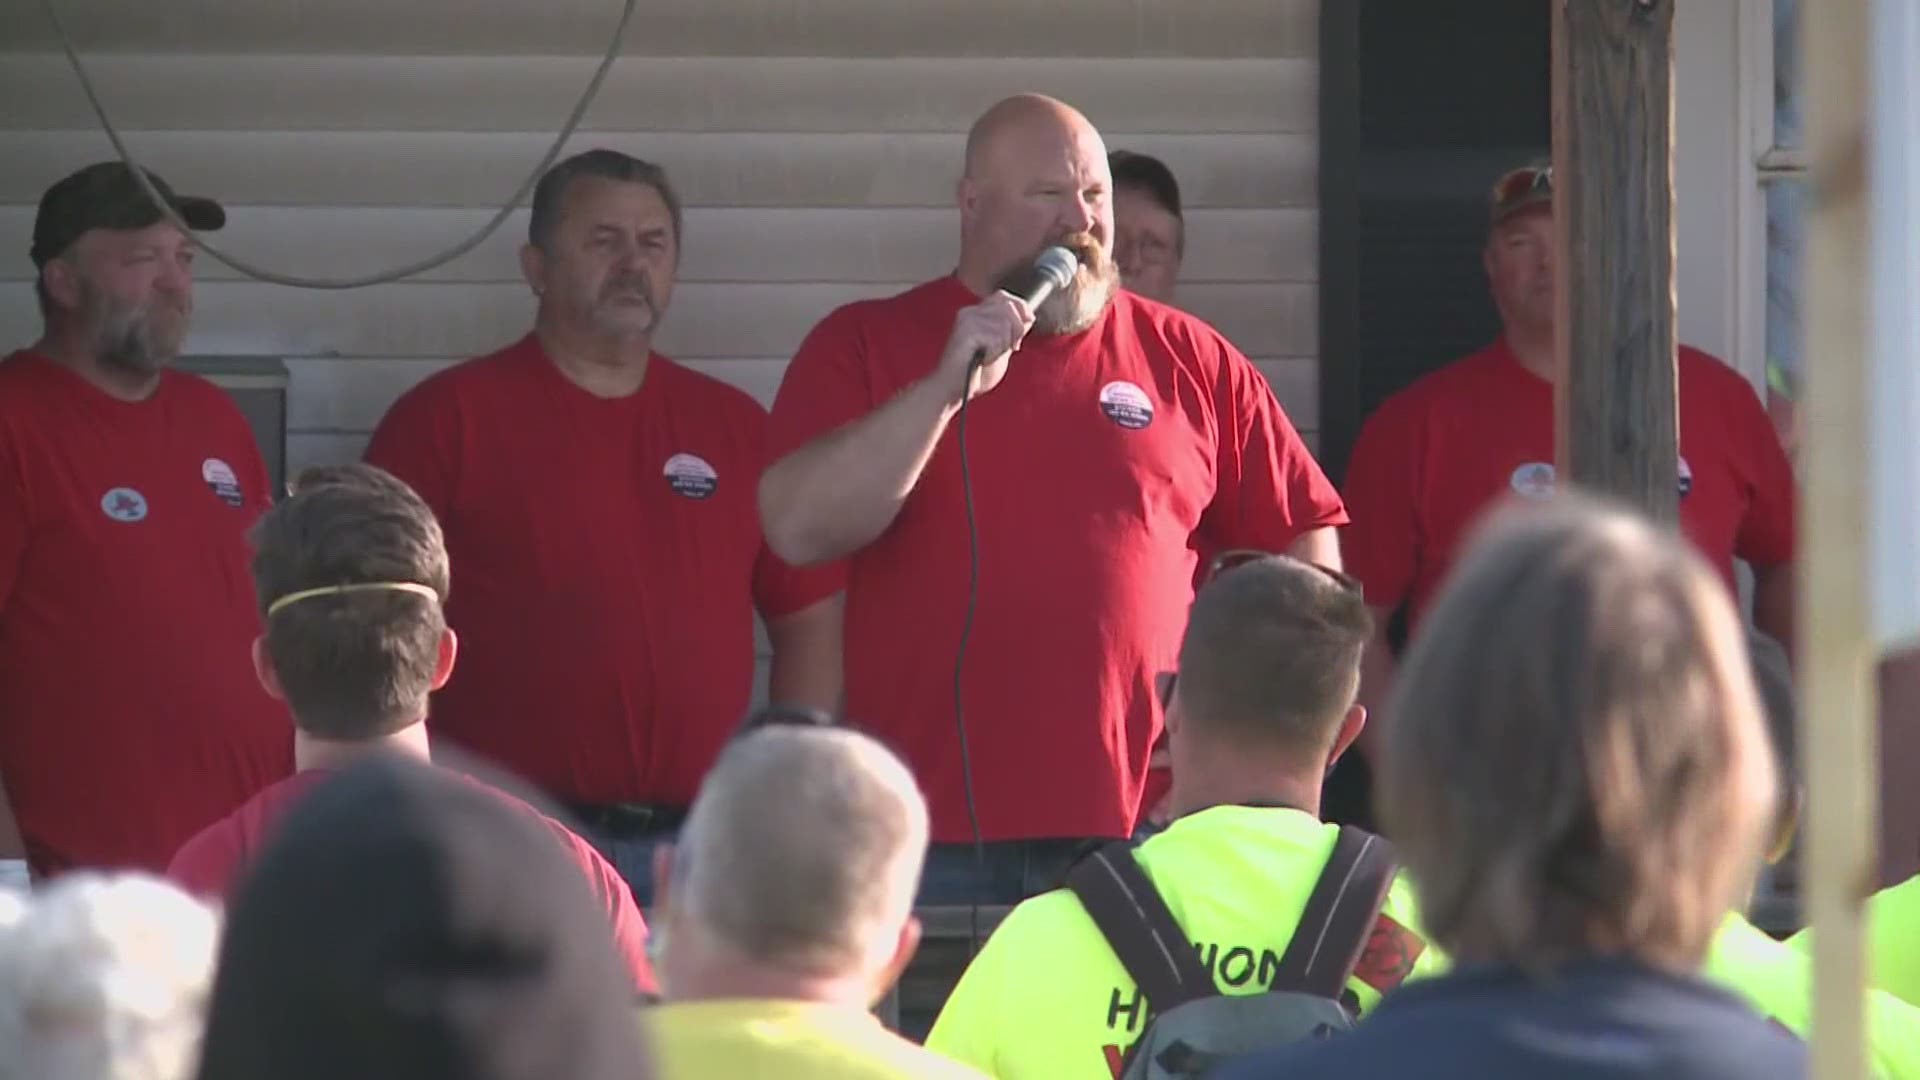 BIW union workers hold rally